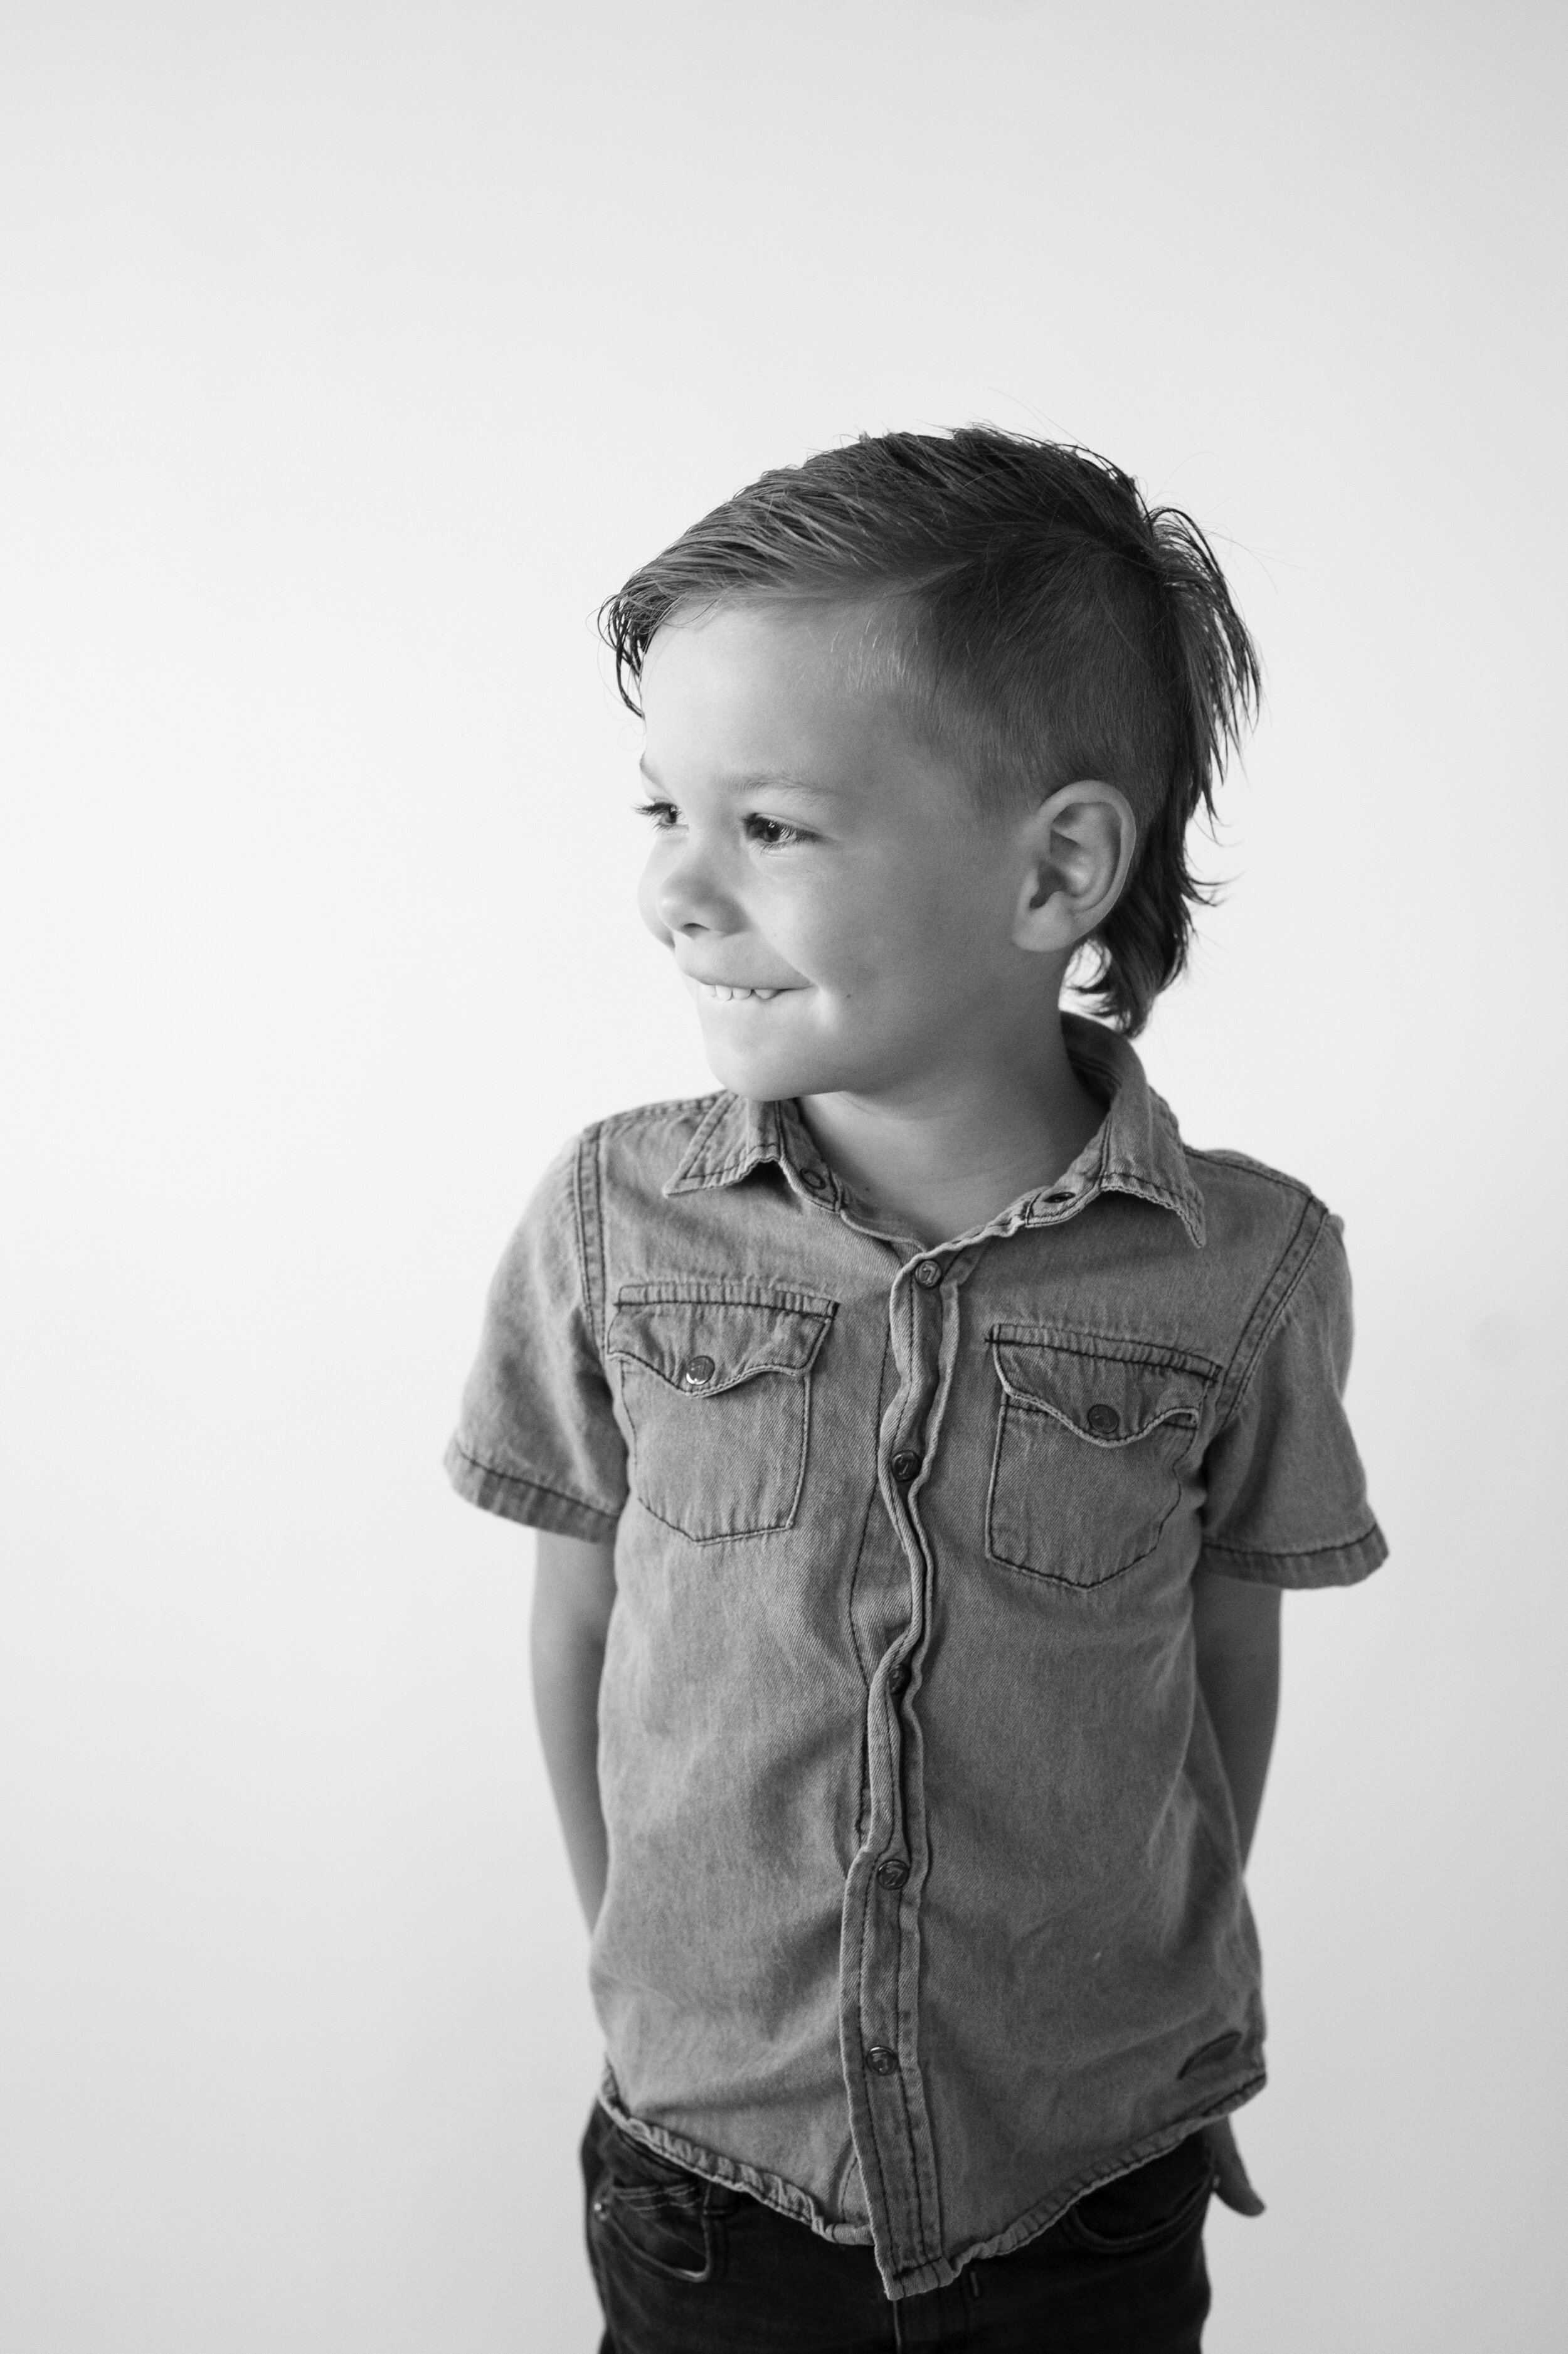 A young boy with a mohawk style hair cut wearing a jean shirt. He is smiling and looking to the side. He is standing against a white background.